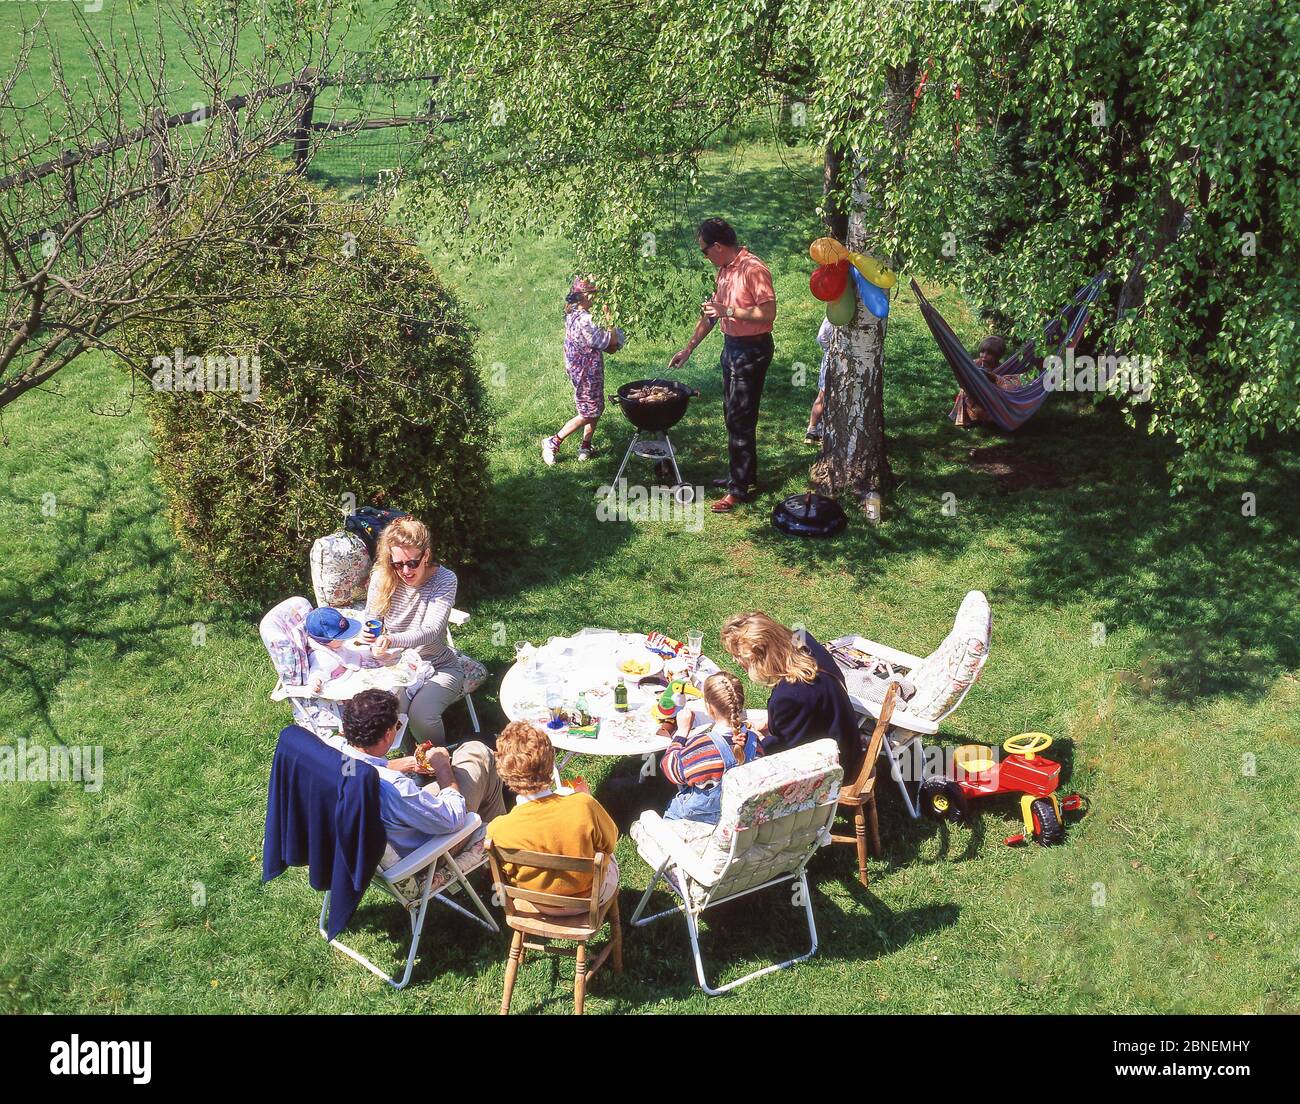 Family barbeque in garden, Winkfield, Berkshire, England, United Kingdom Stock Photo